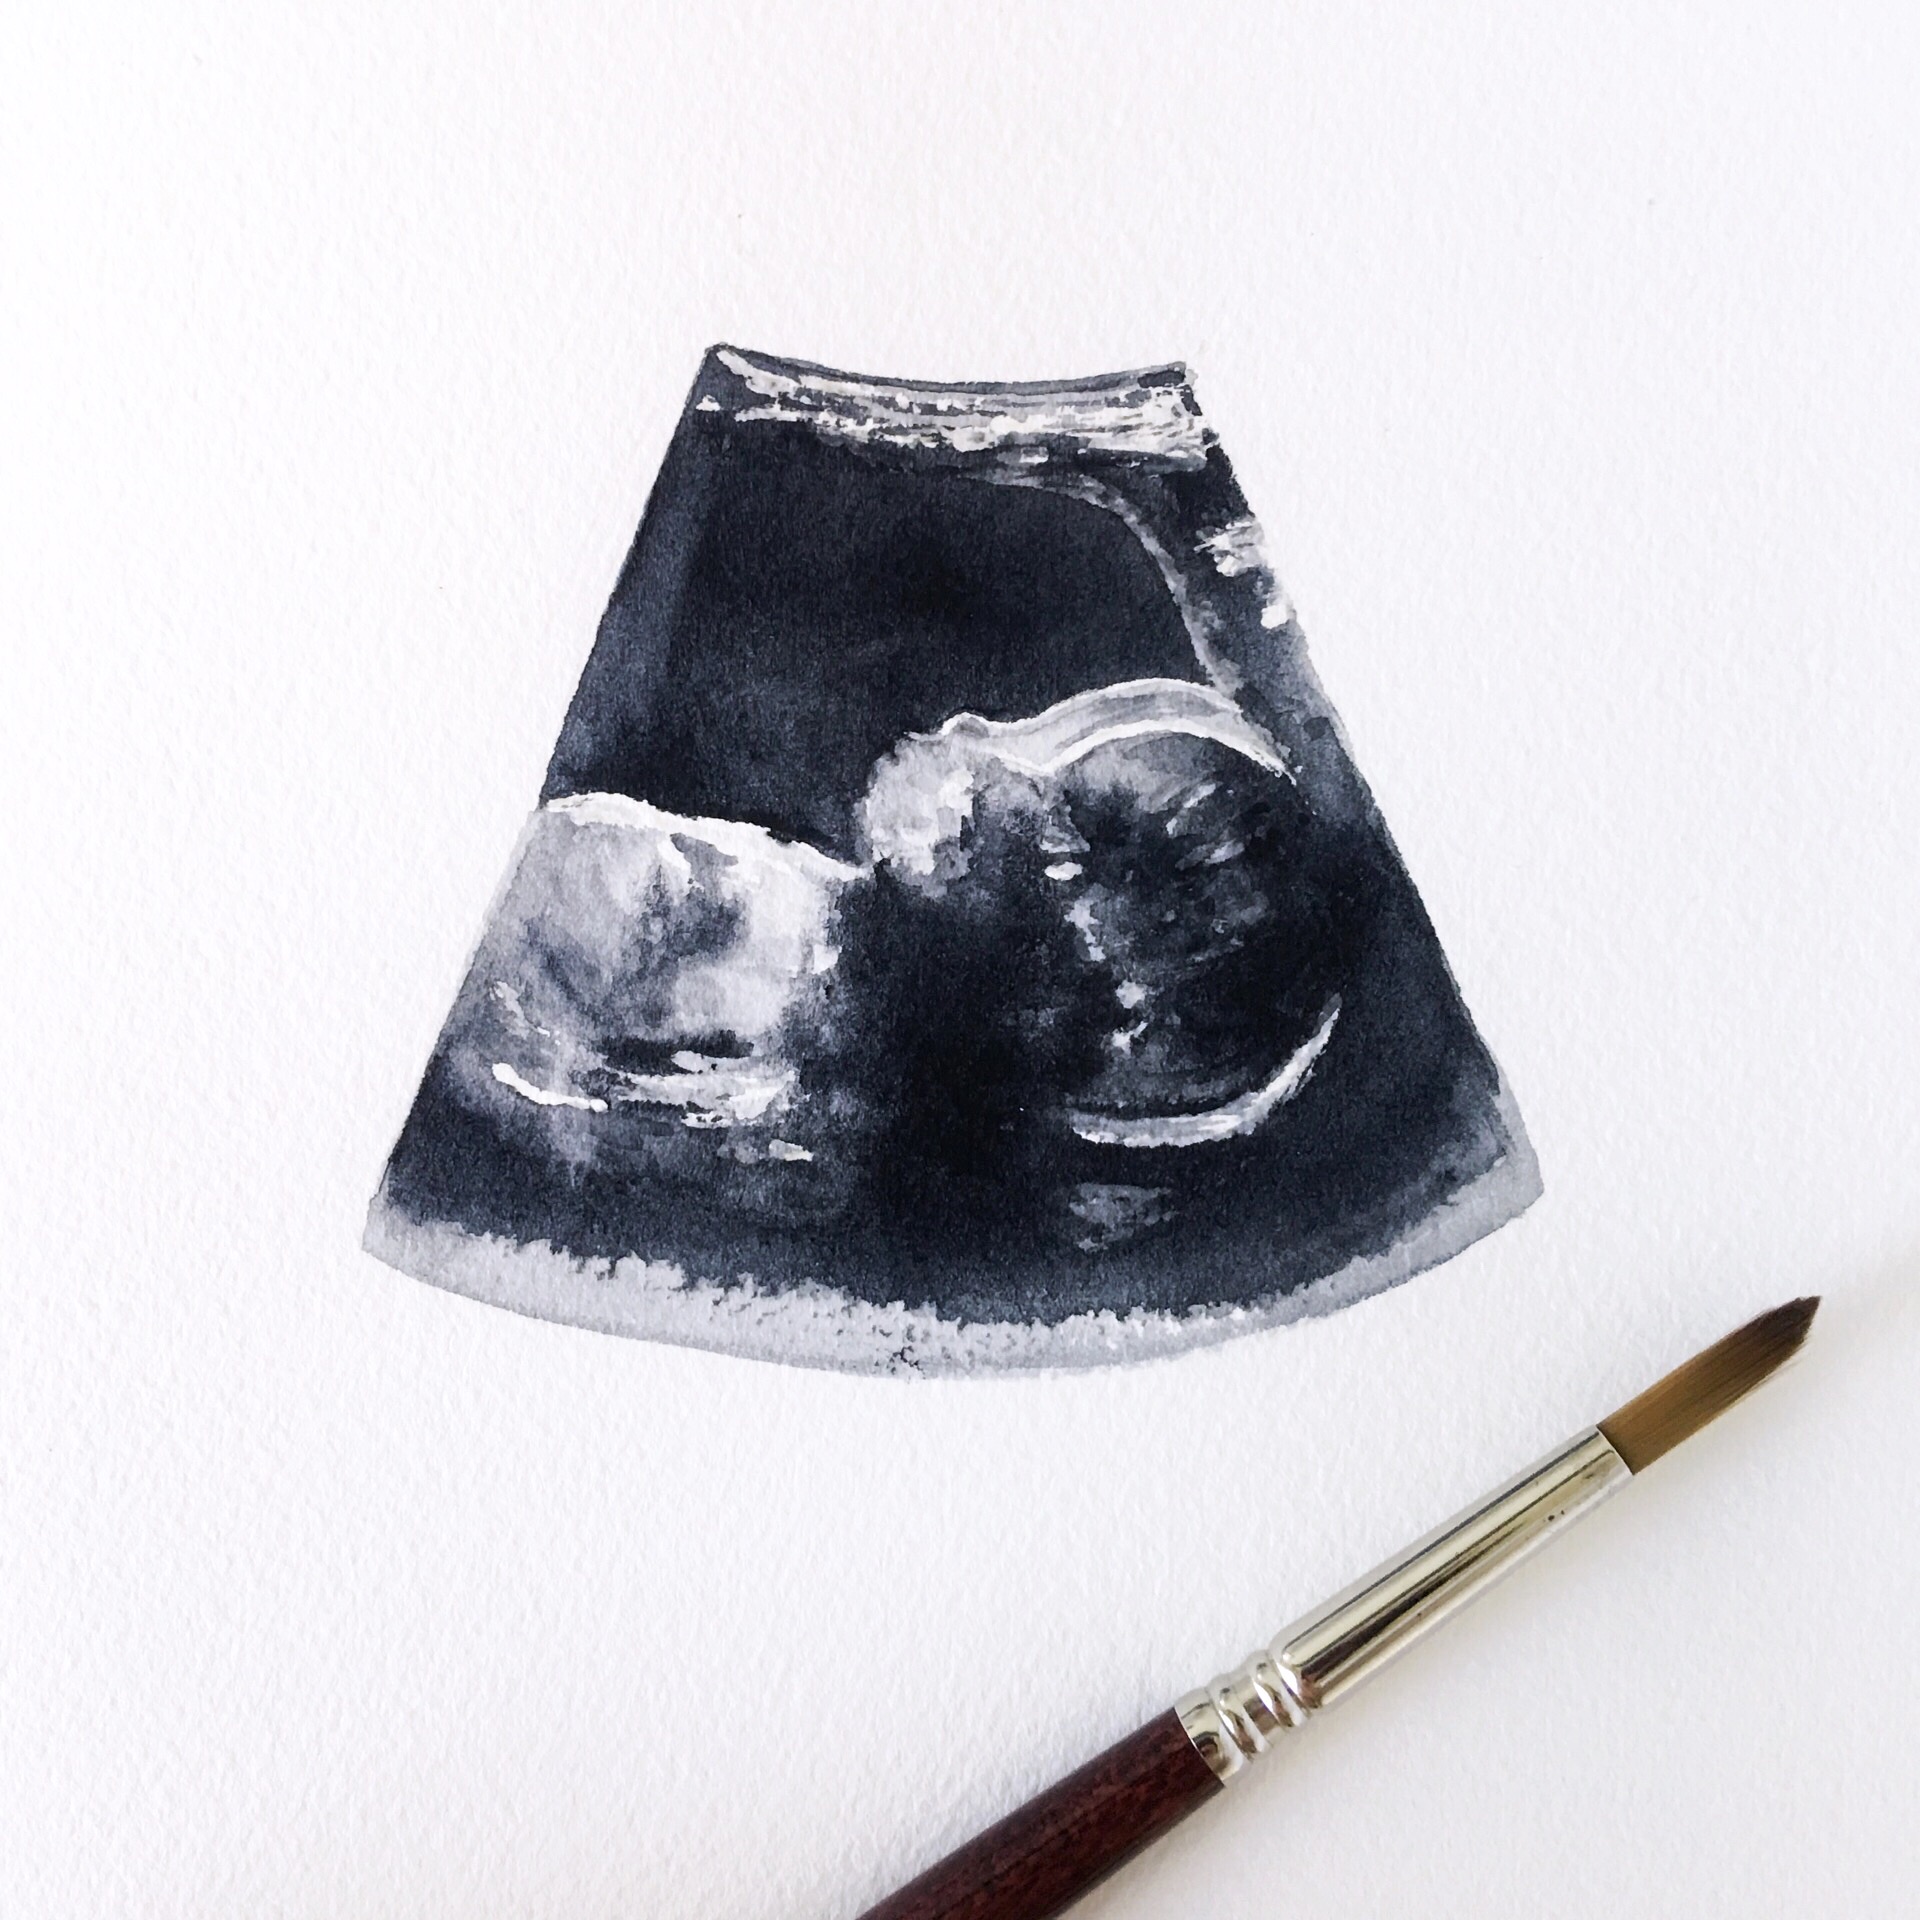 Ultrasound painting